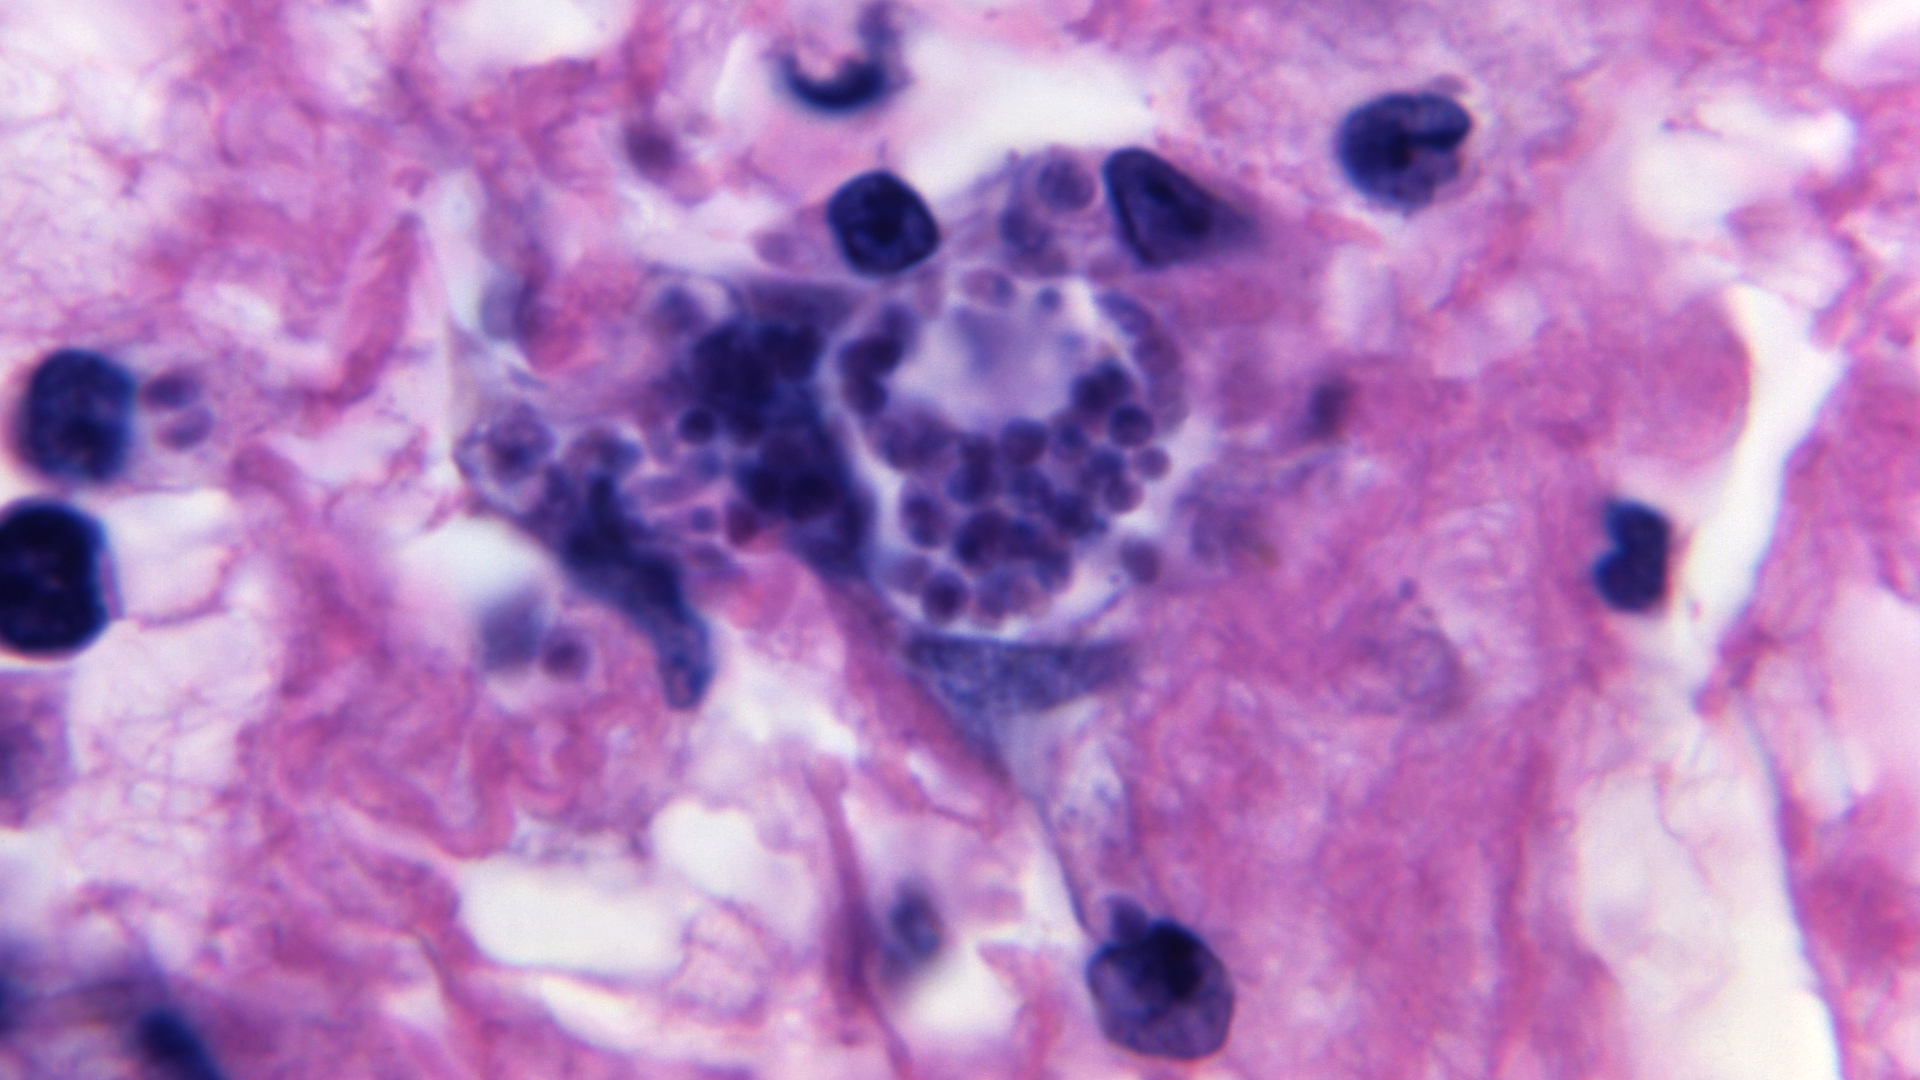 A view of a tissue sample that shows a Toxoplasma gondii cyst, the parasite that causes toxoplasmosis.